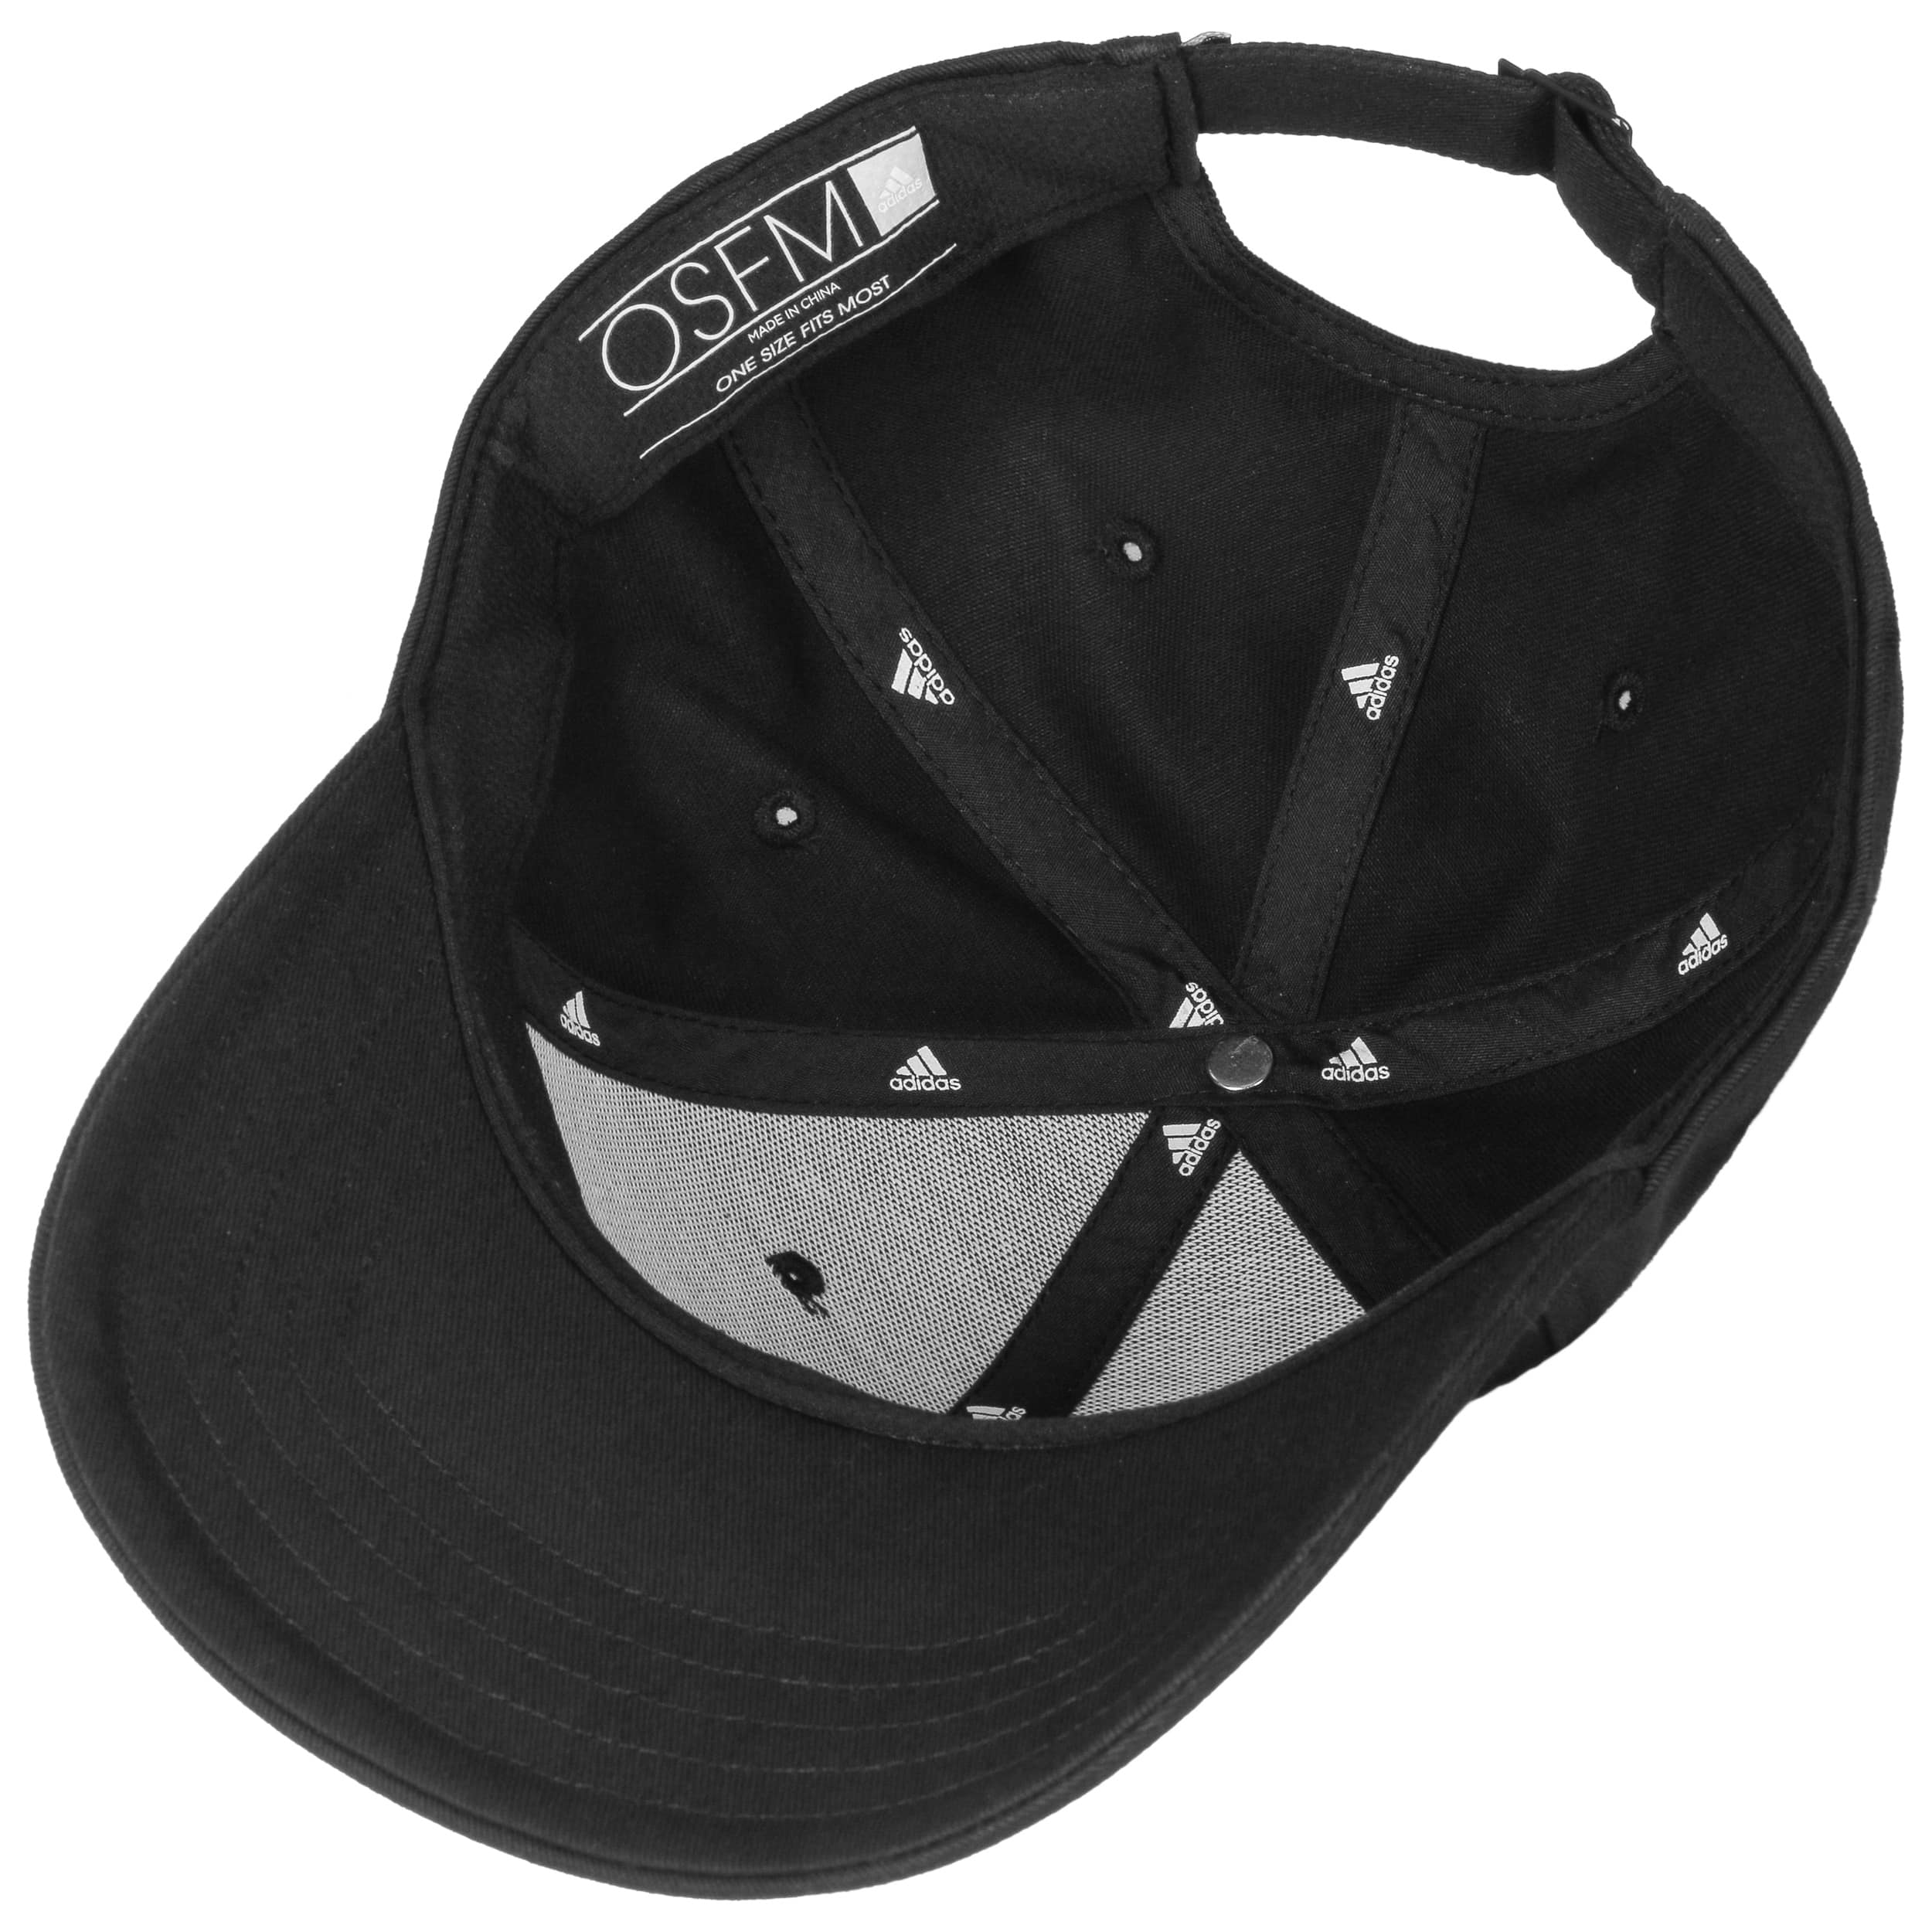 adidas one size fits all hat